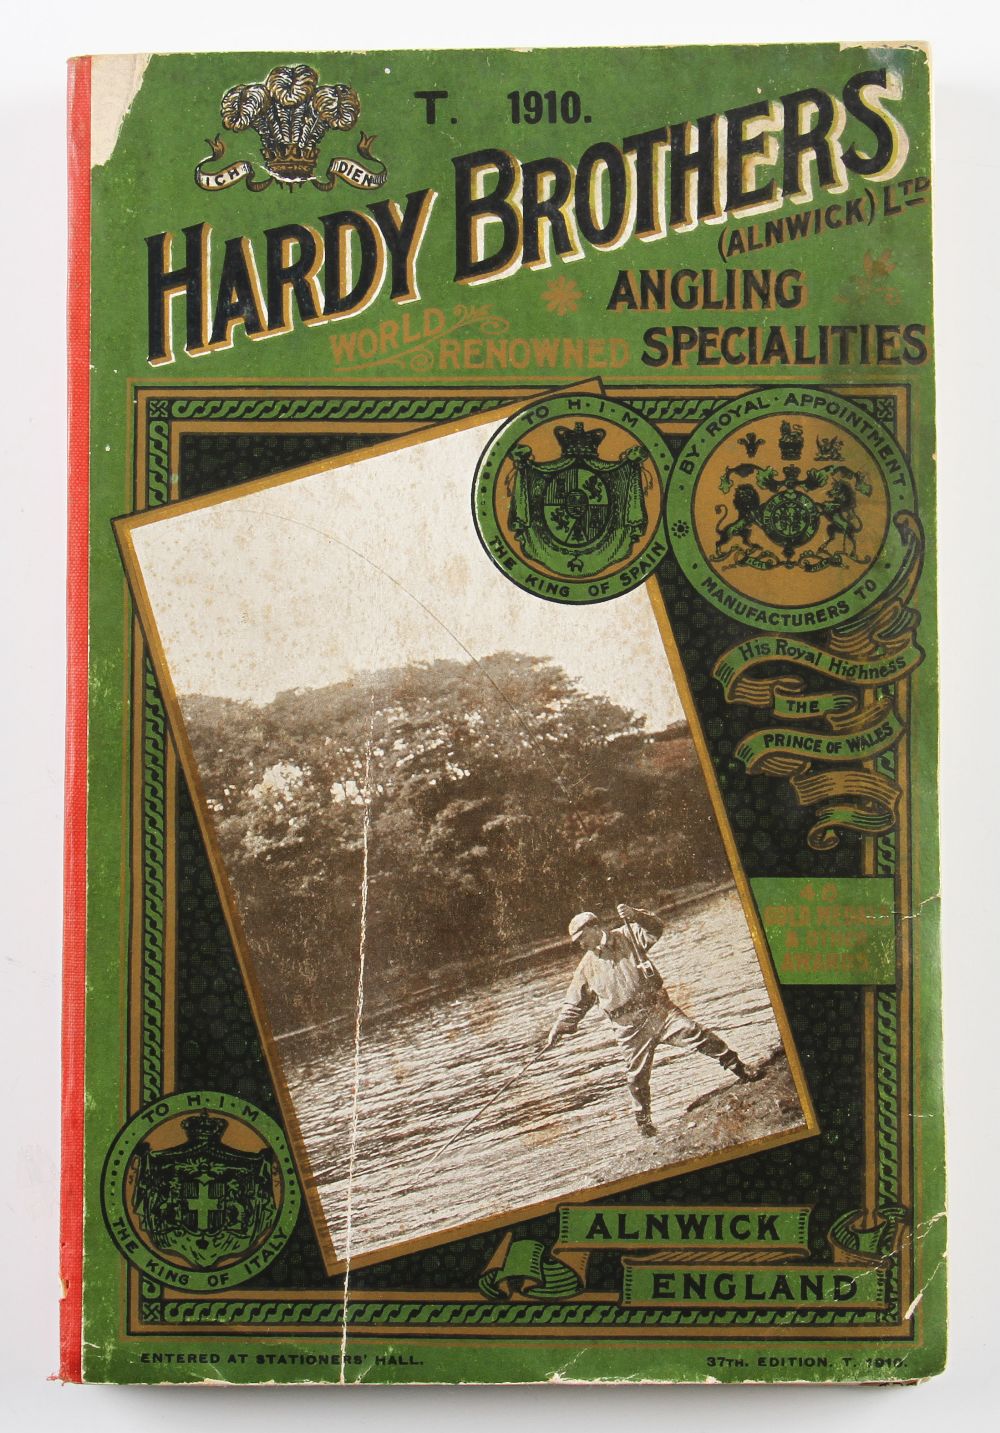 Scarce Hardy Angler's Guide 1910 (T) in fair condition internally clean with stepped index. Covers